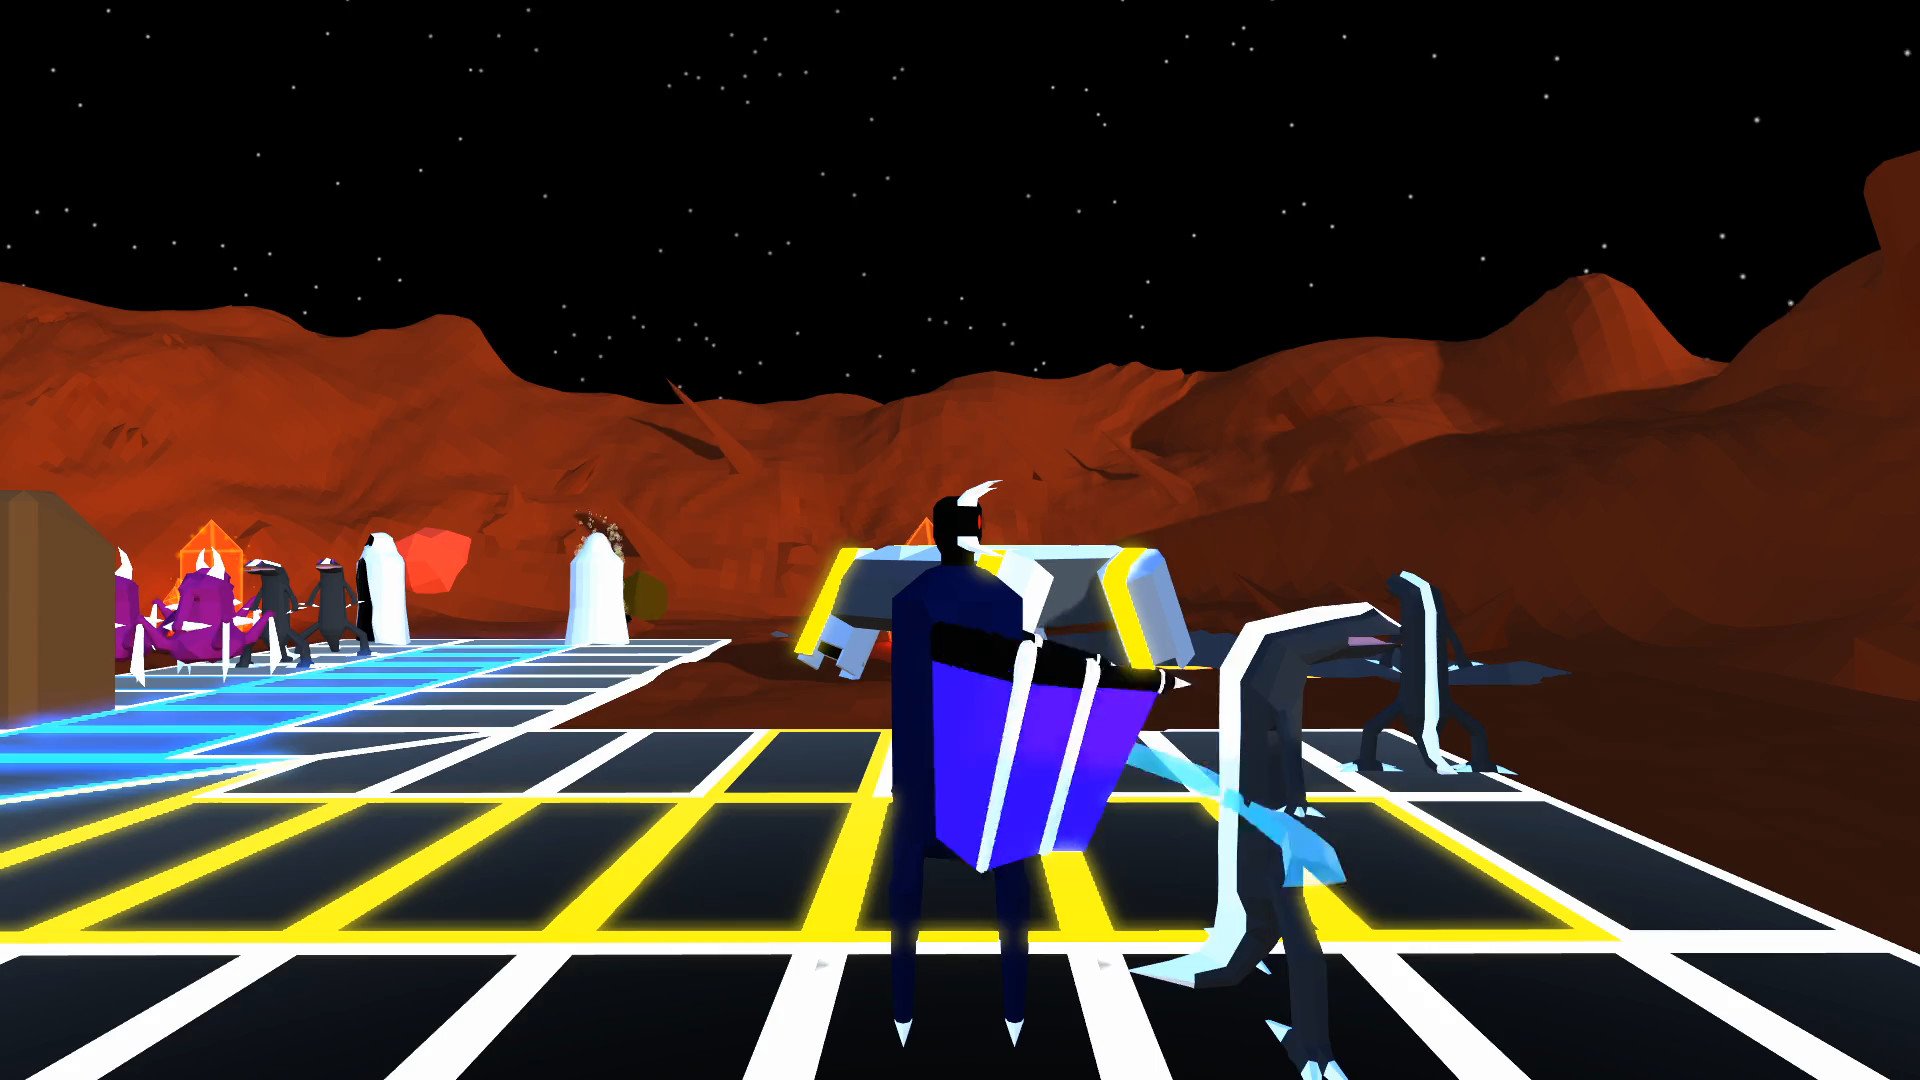 Parkalien: a ludo in the space screenshot